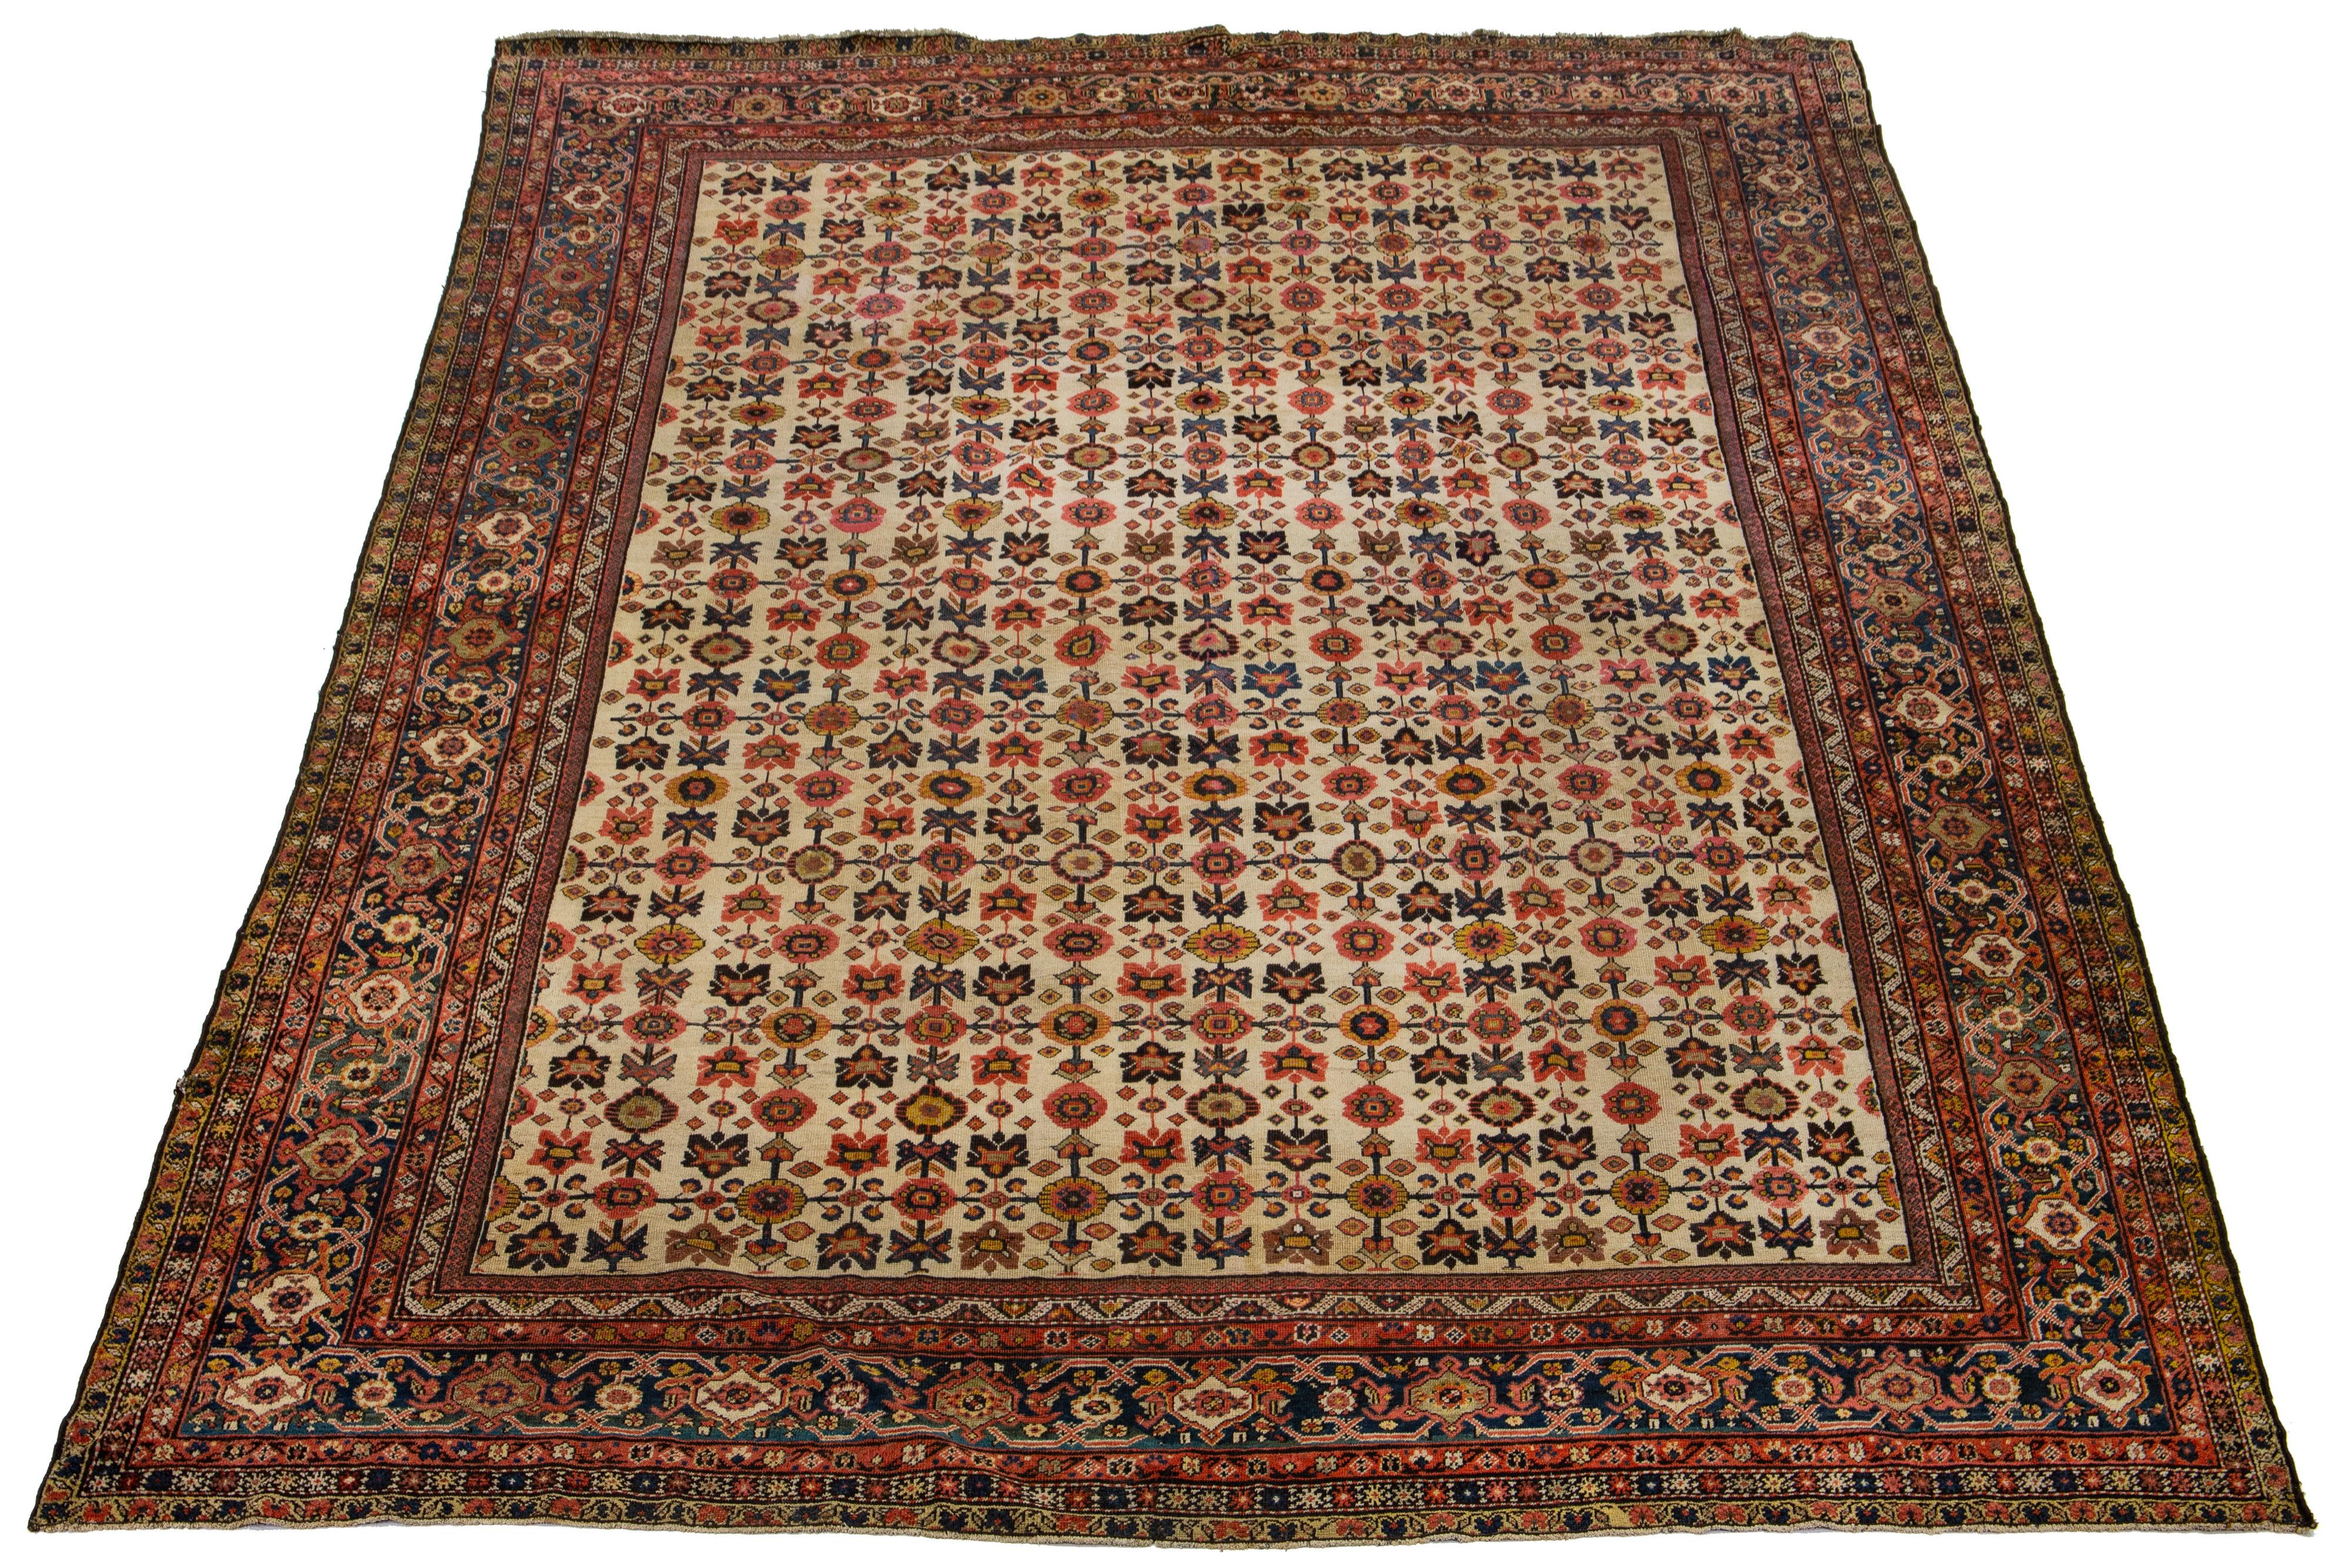 This is a beautiful Persian antique Farahan hand-knotted wool rug from the 1880s. It has a beige-tan color field and features classic multicolor accents in a floral pattern.

This rug measures 11'10